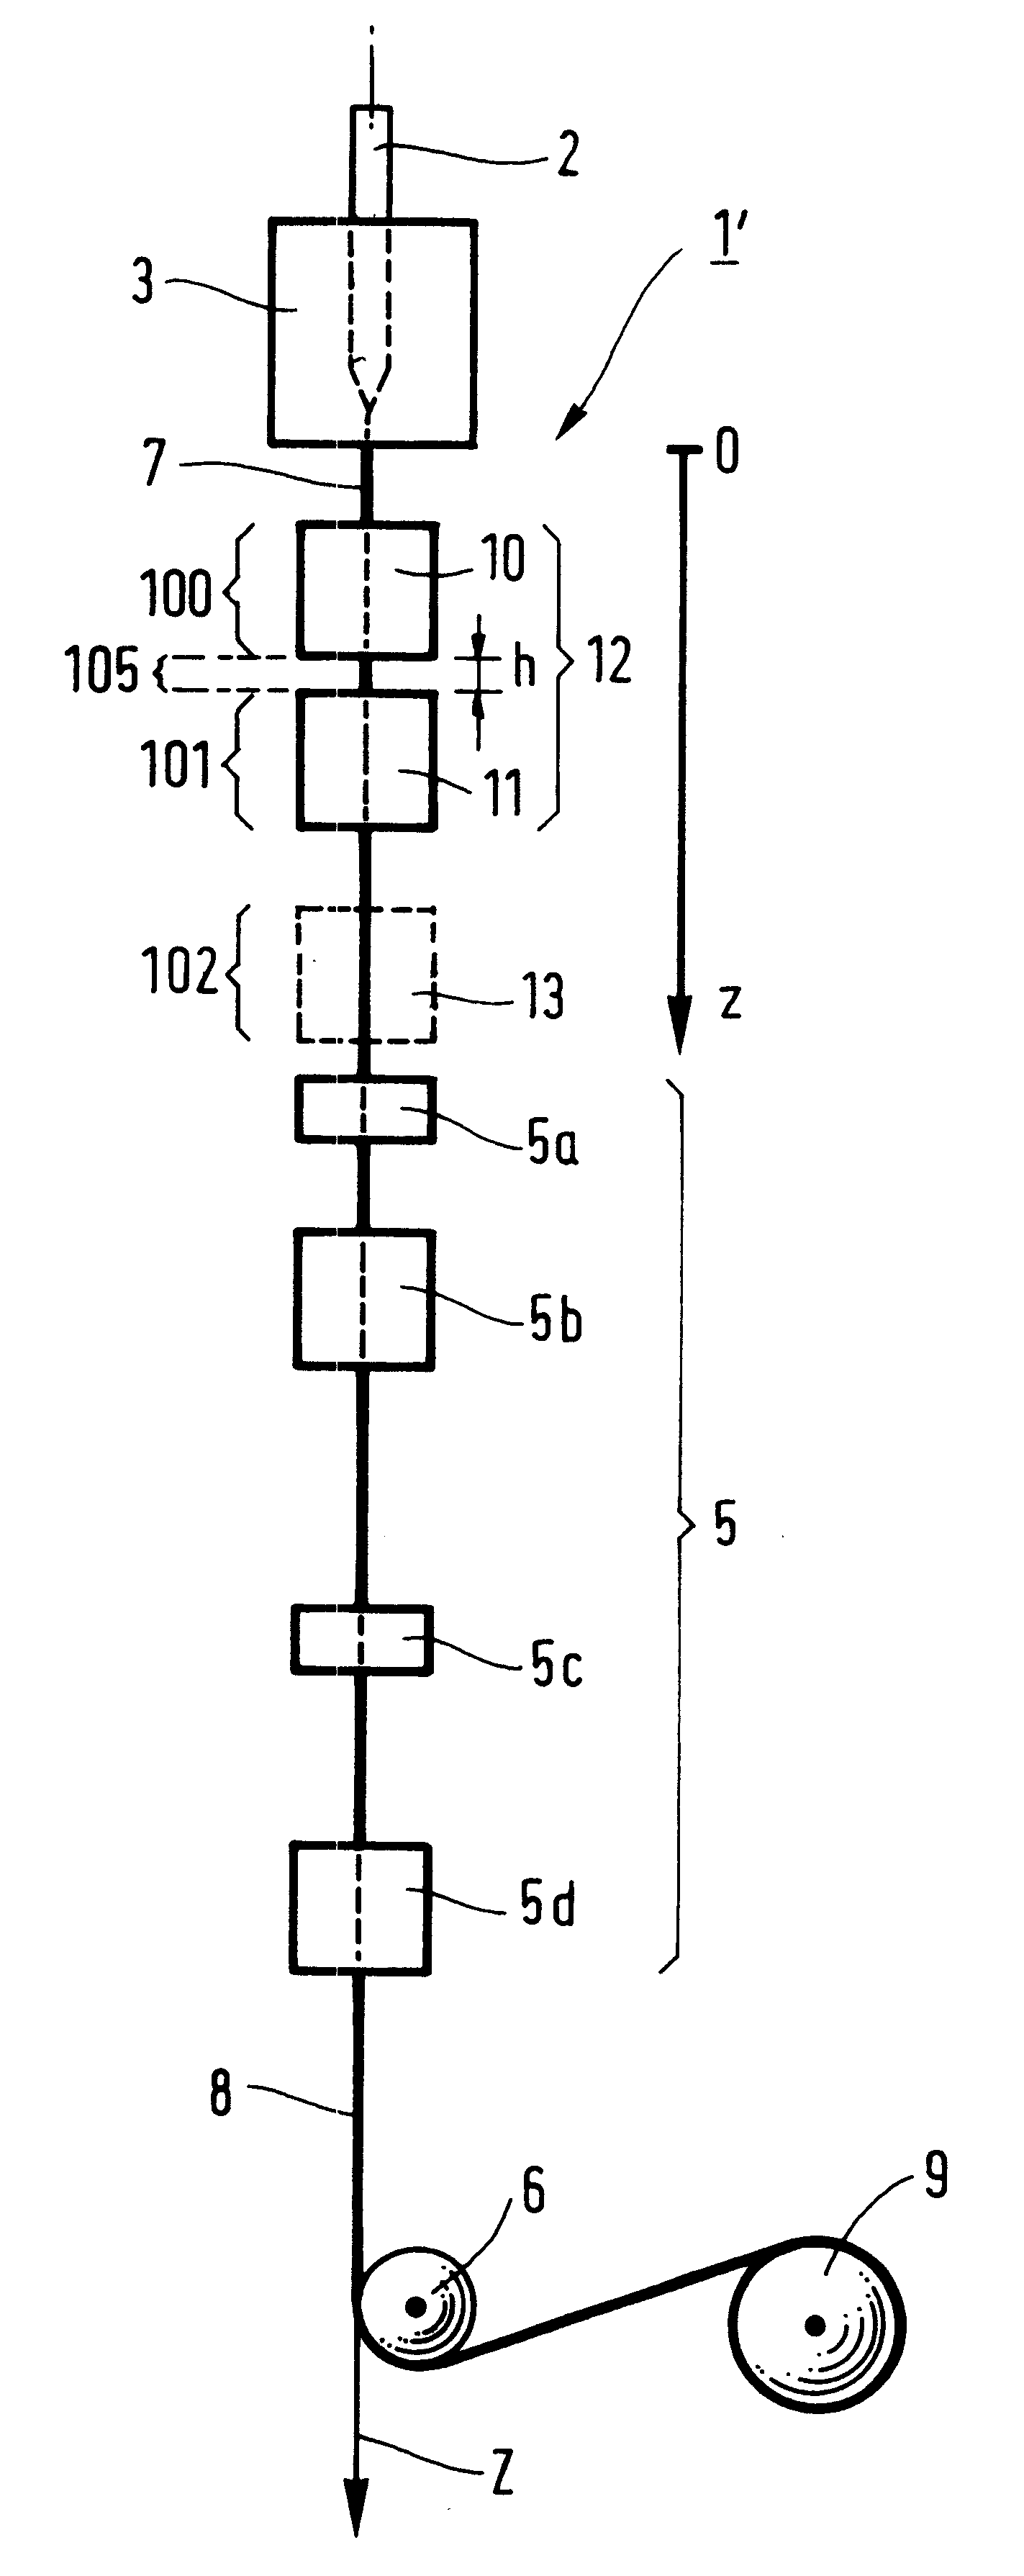 Method of cooling an optical fiber while it is being drawn